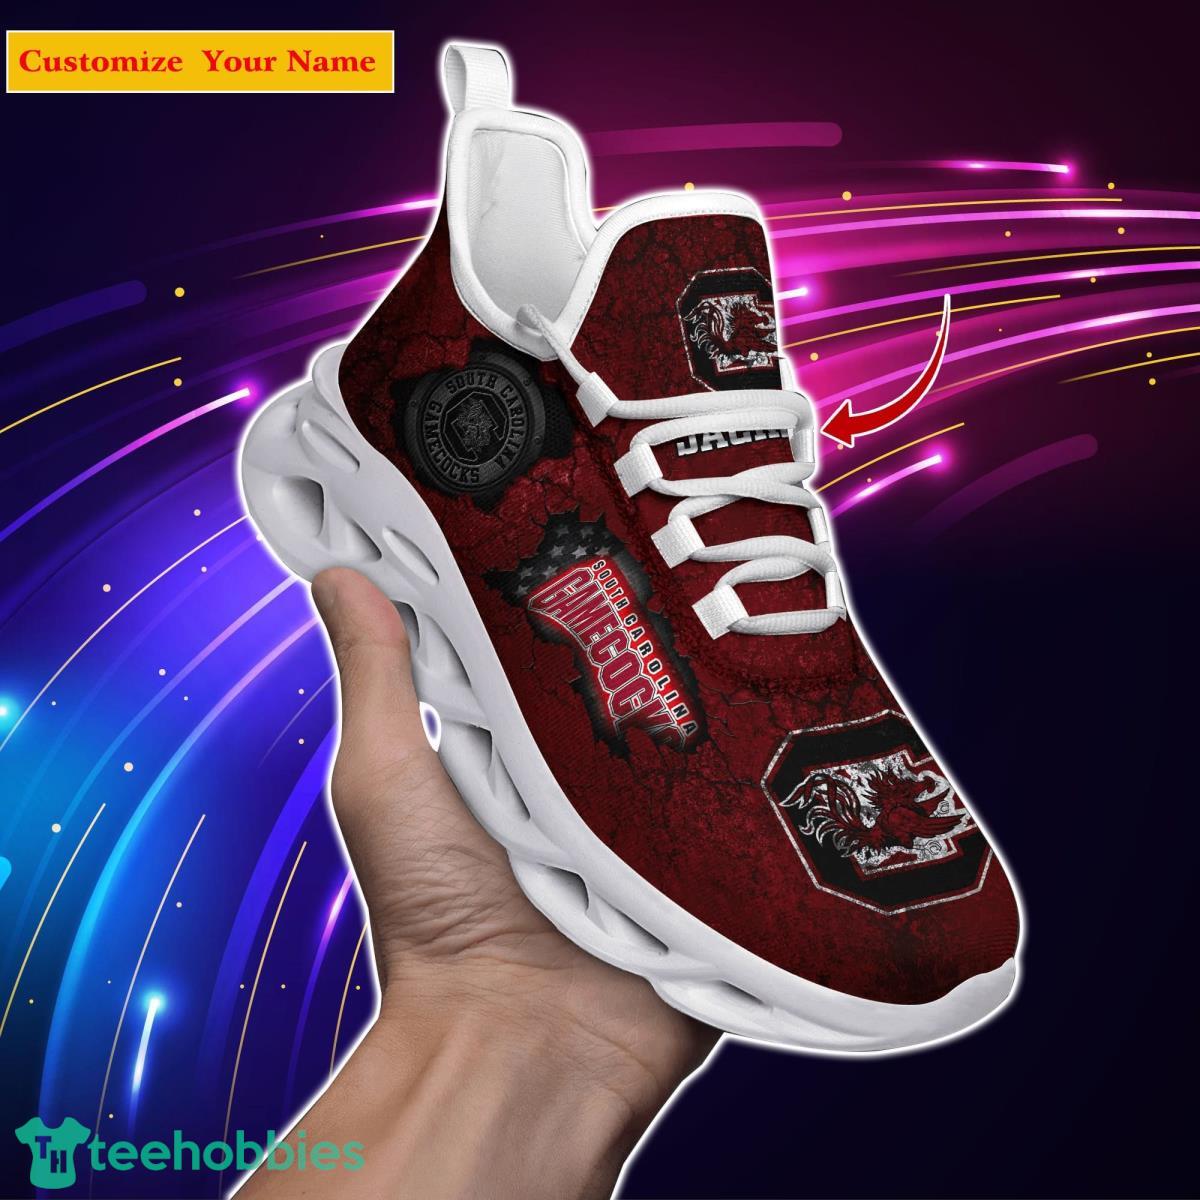 South Carolina Gamecocks NCAA1 Custom Name Max Soul Shoes Great Gift For Men Women Fans Product Photo 1